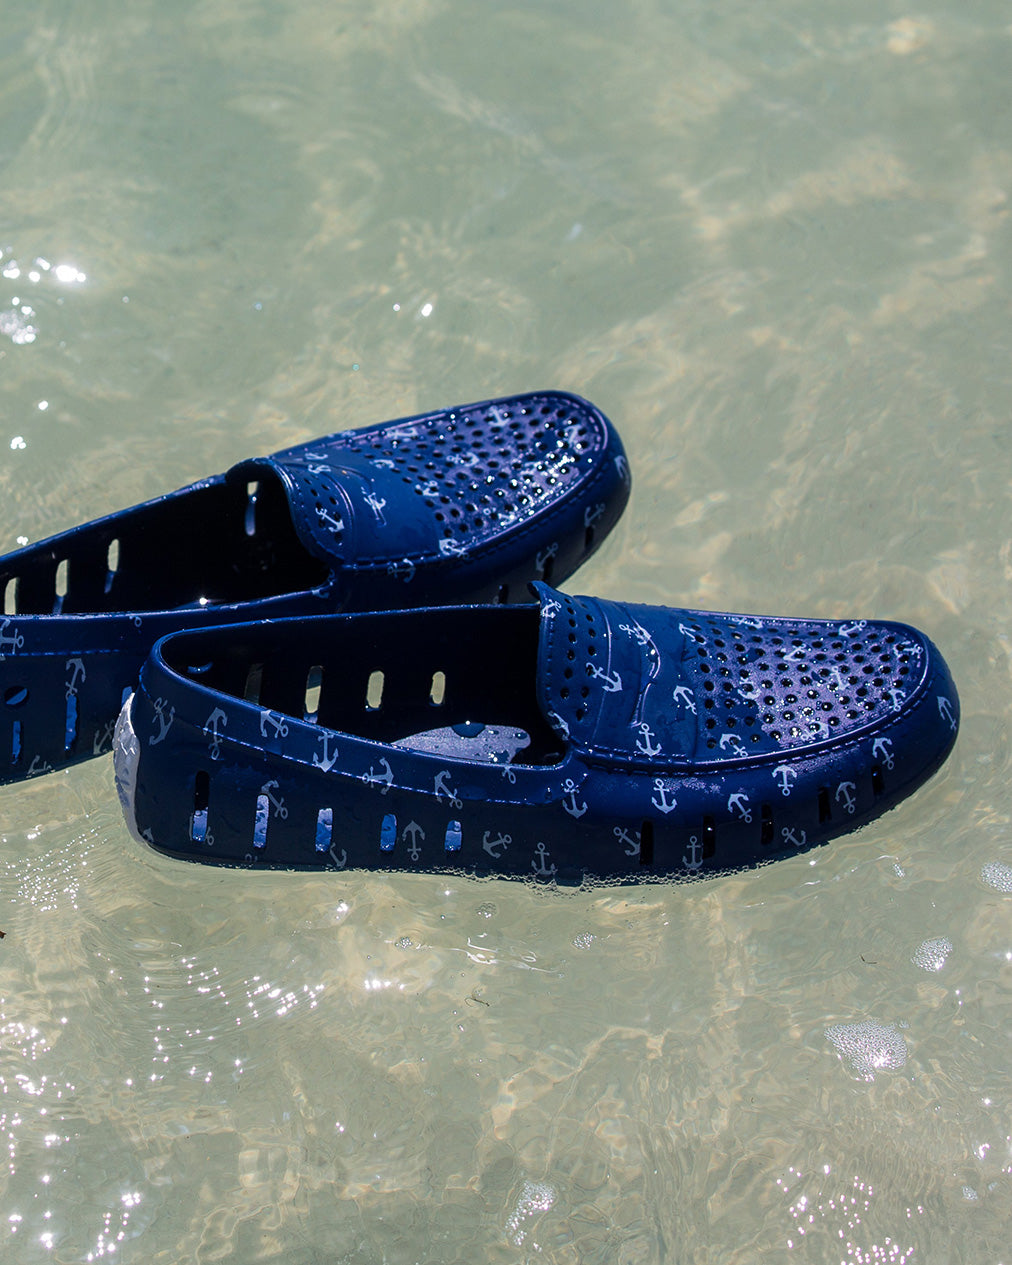 Blue Floafers with anchor pattern floating in water